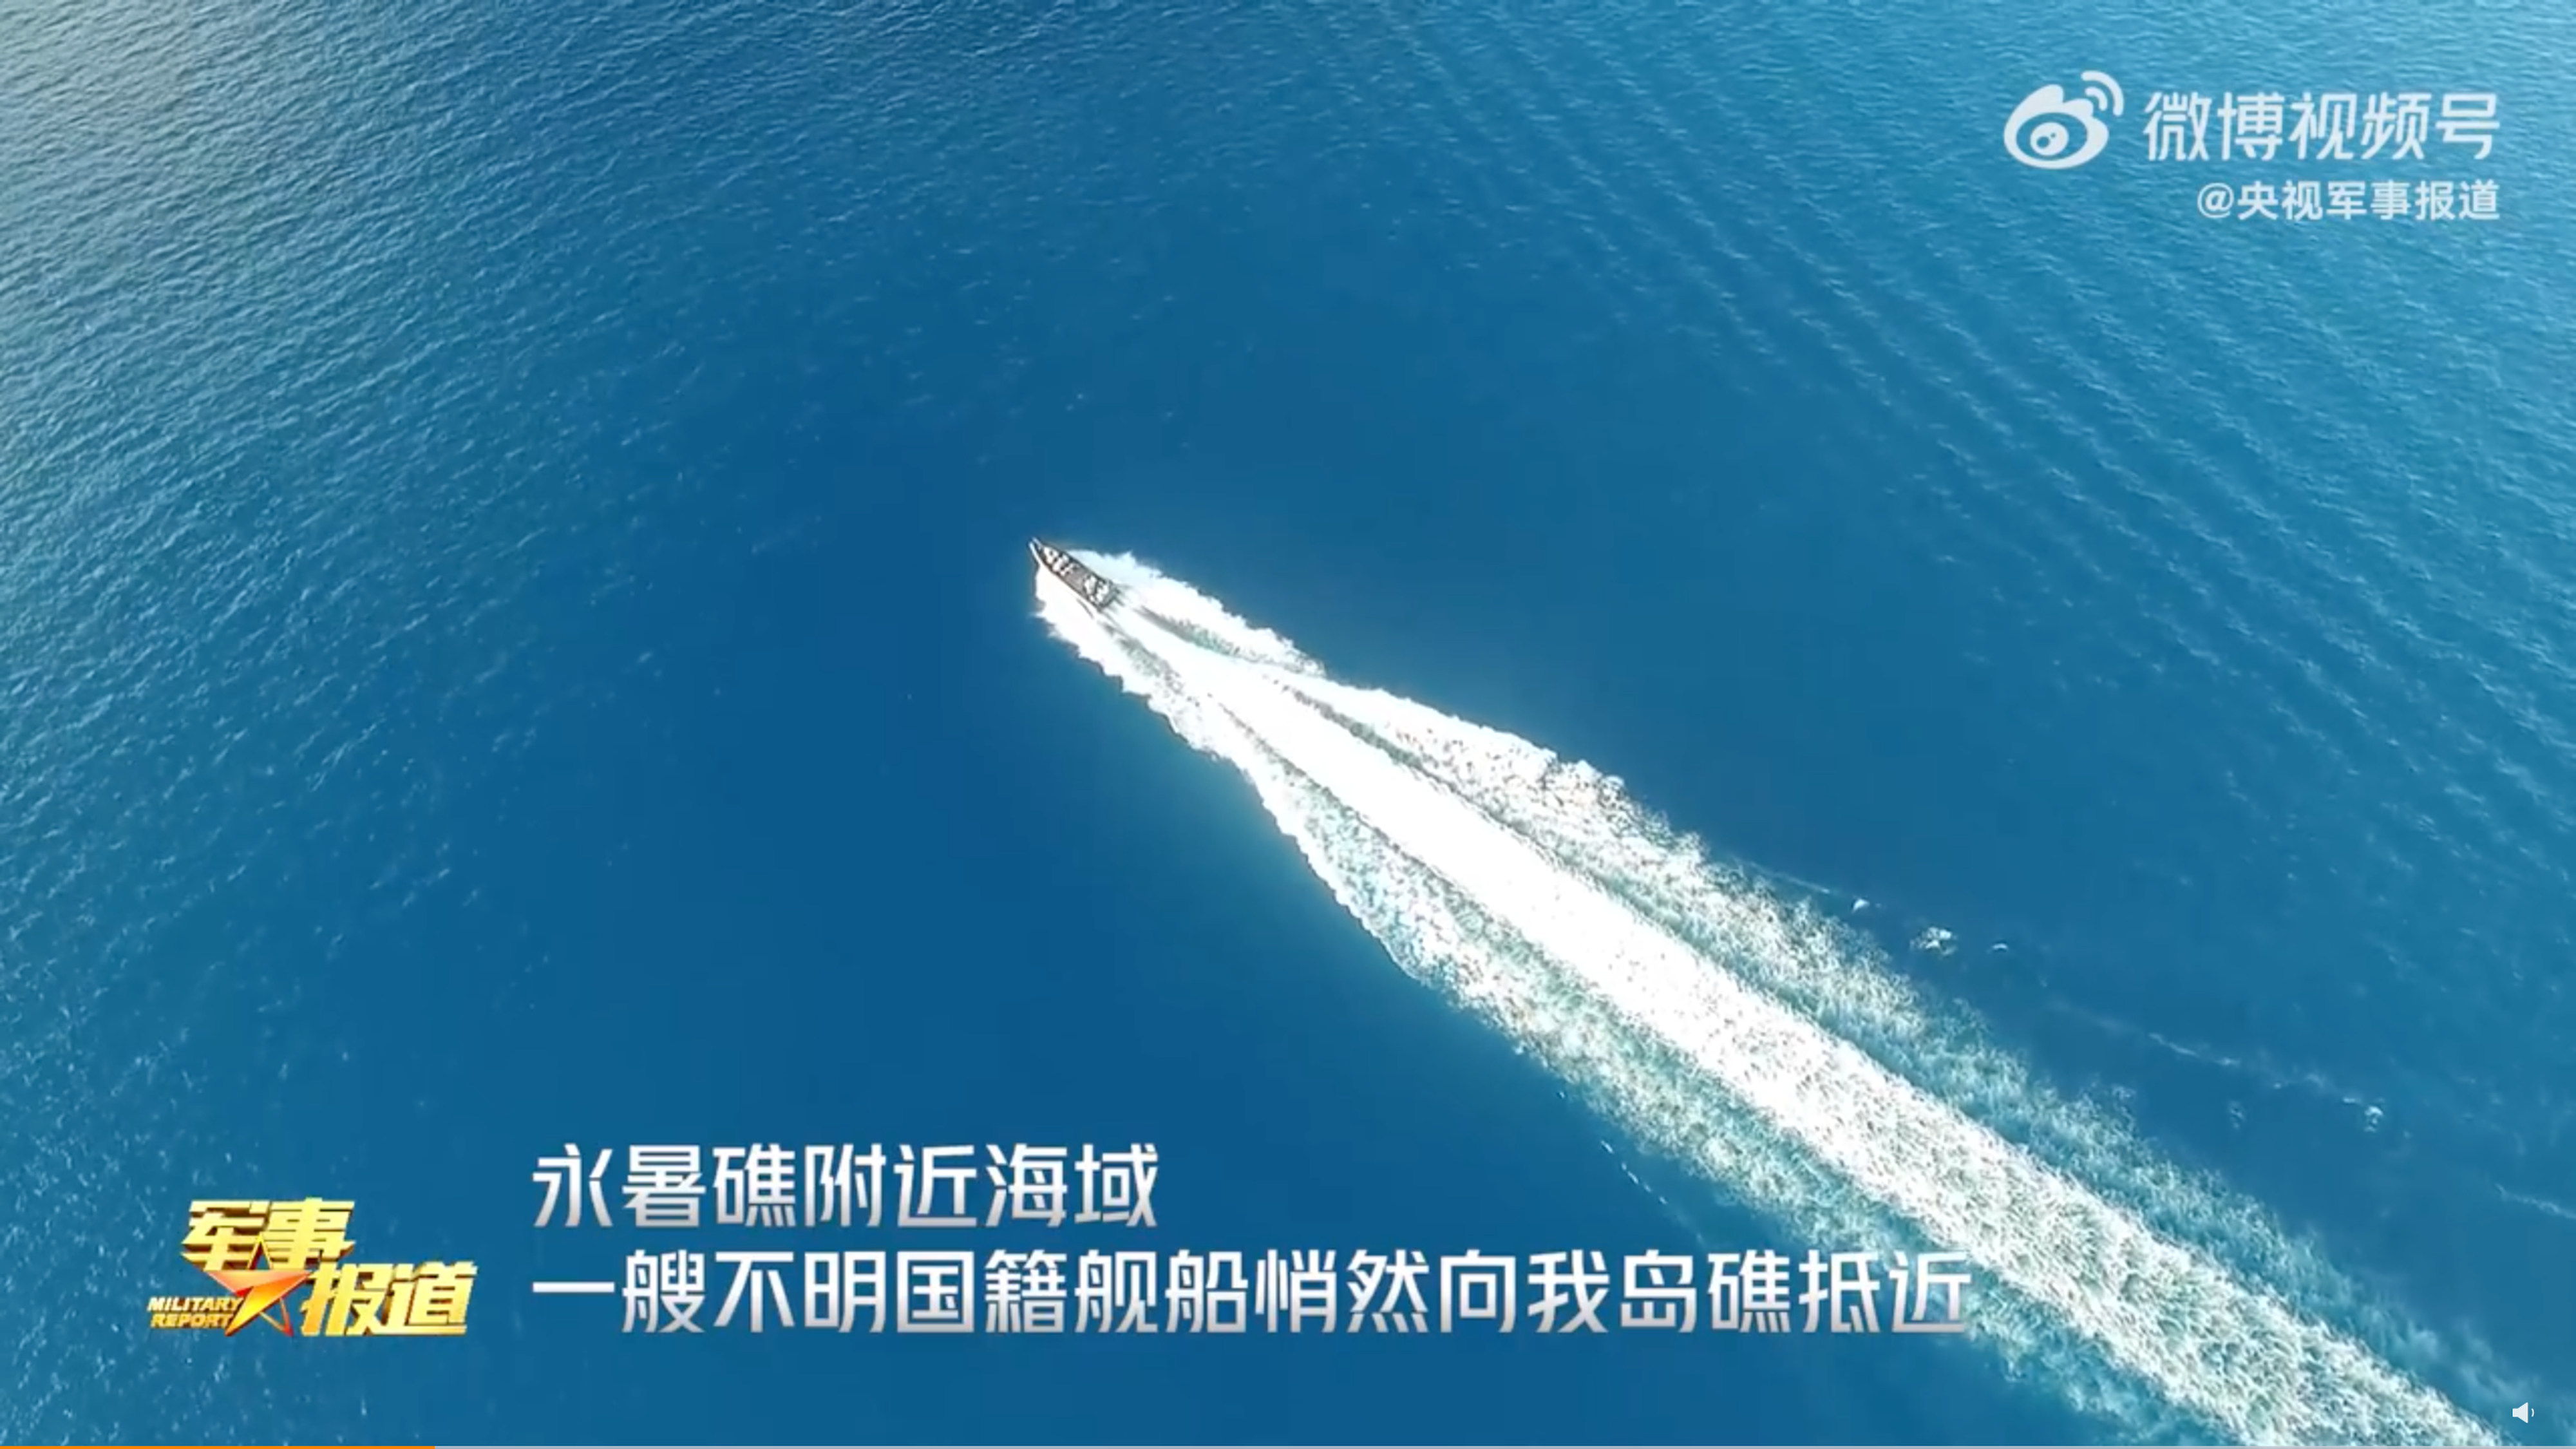 CCTV aired a re-enactment of PLA speedboats responding to an approaching ship near Fiery Cross Reef. Photo: Weibo